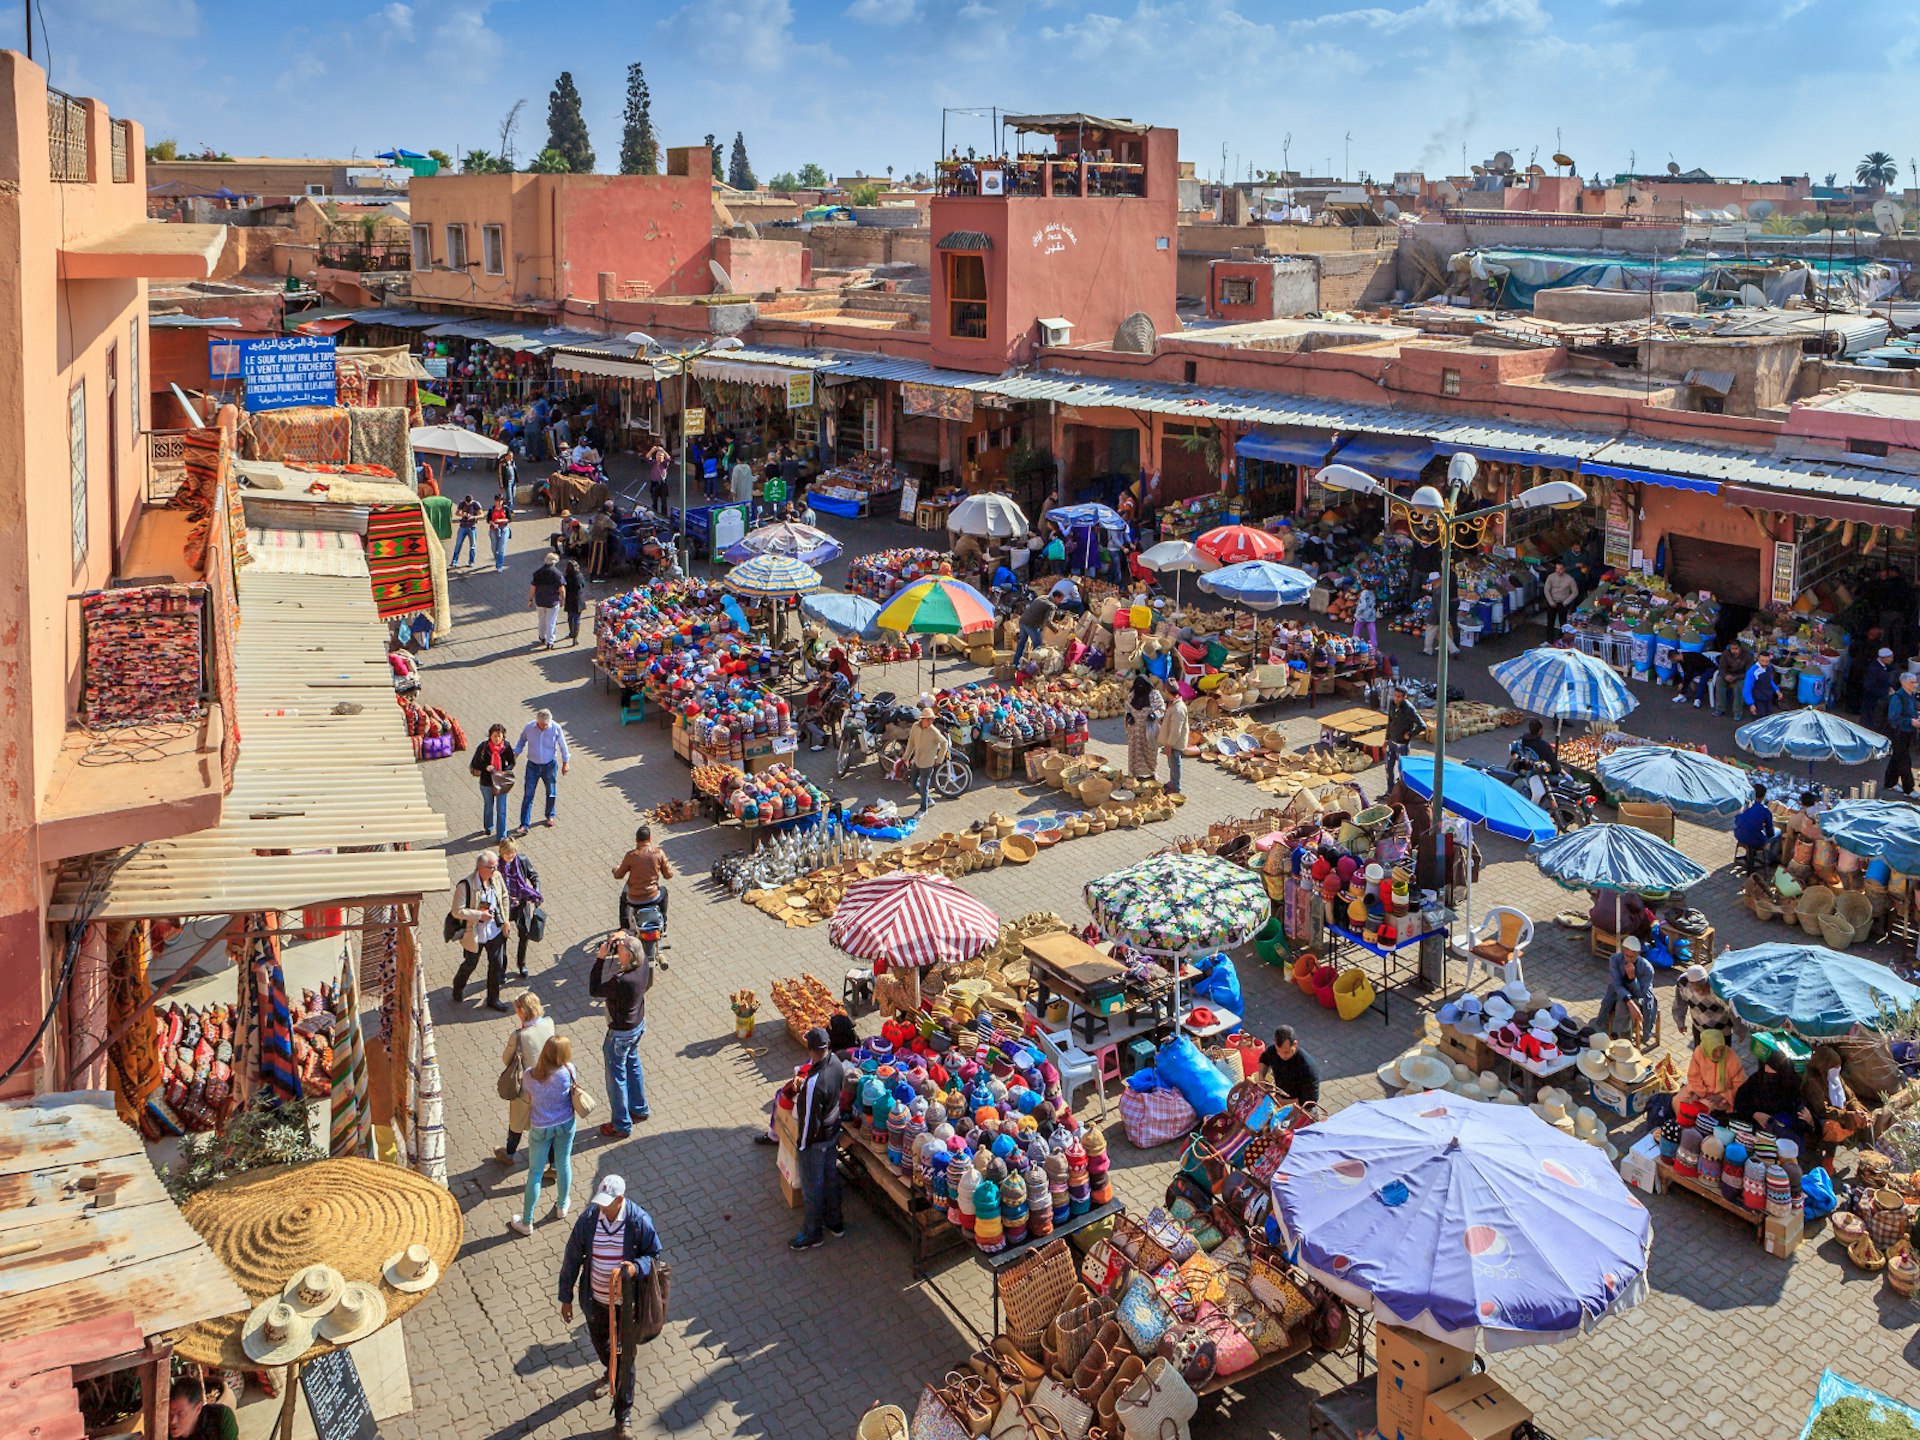 Features - Marrakesh crowded market in the medina, the heart of the old city